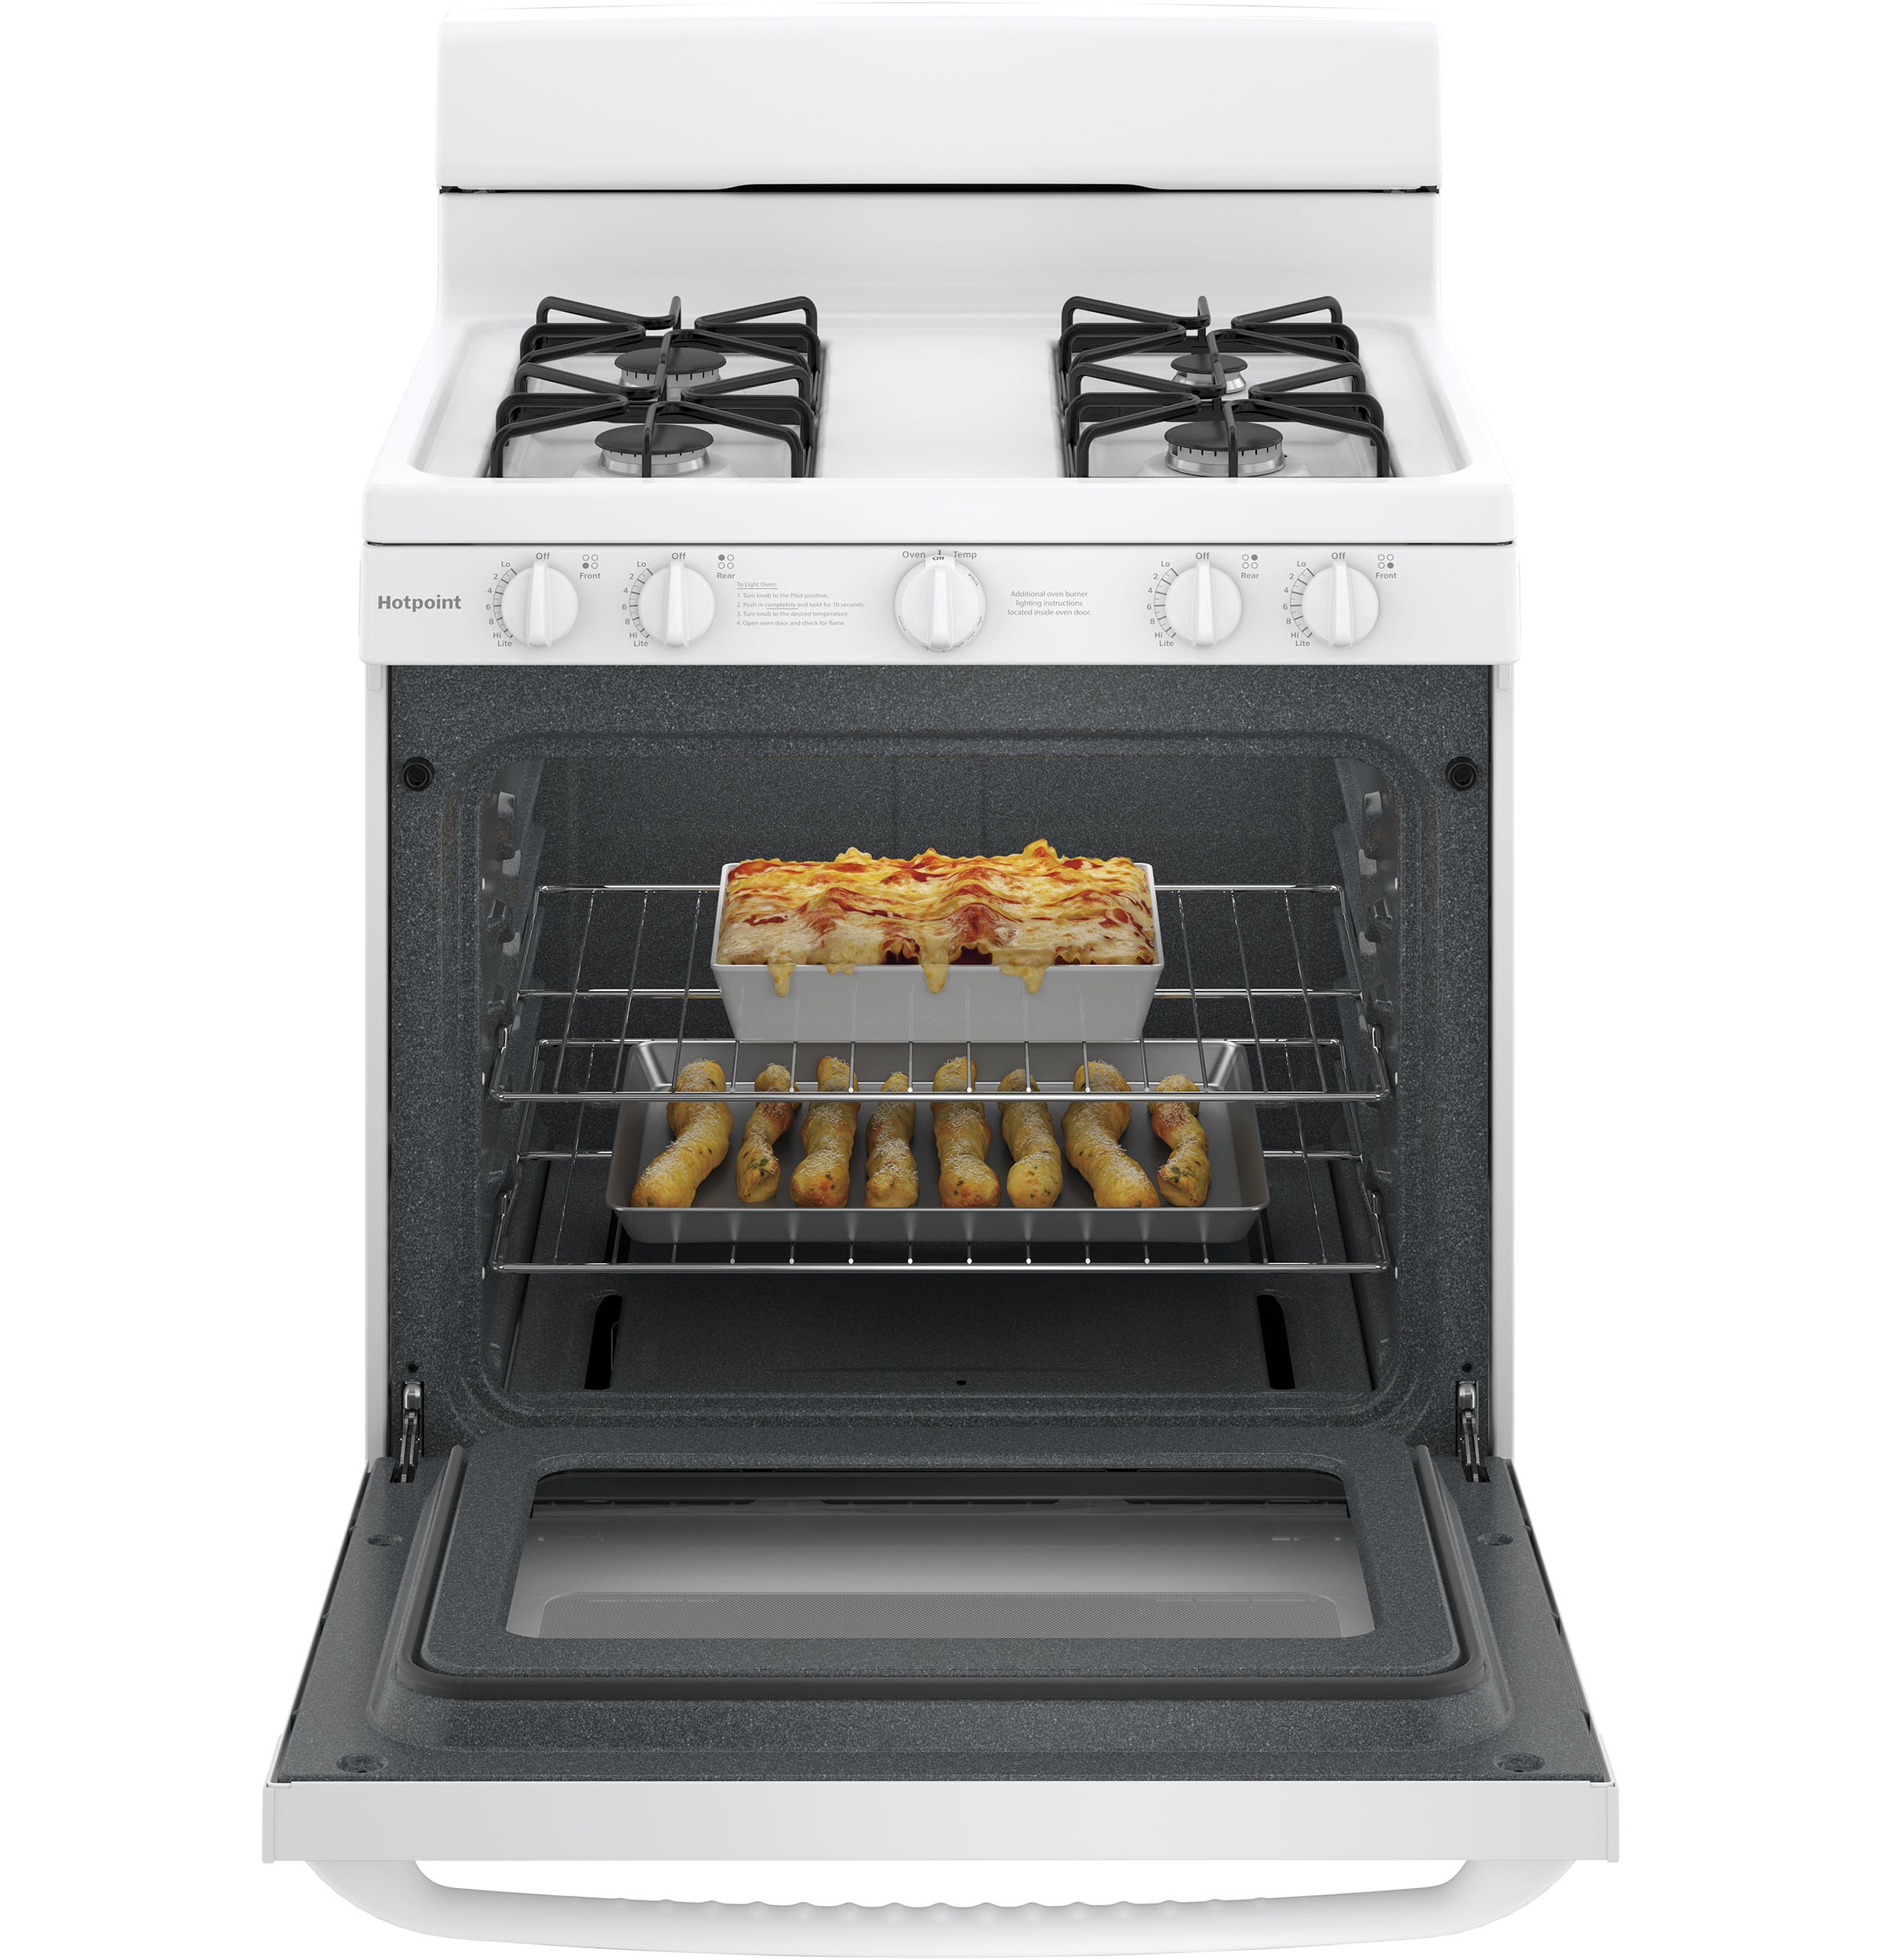 How electric stoves are poised to dethrone the mighty gas range